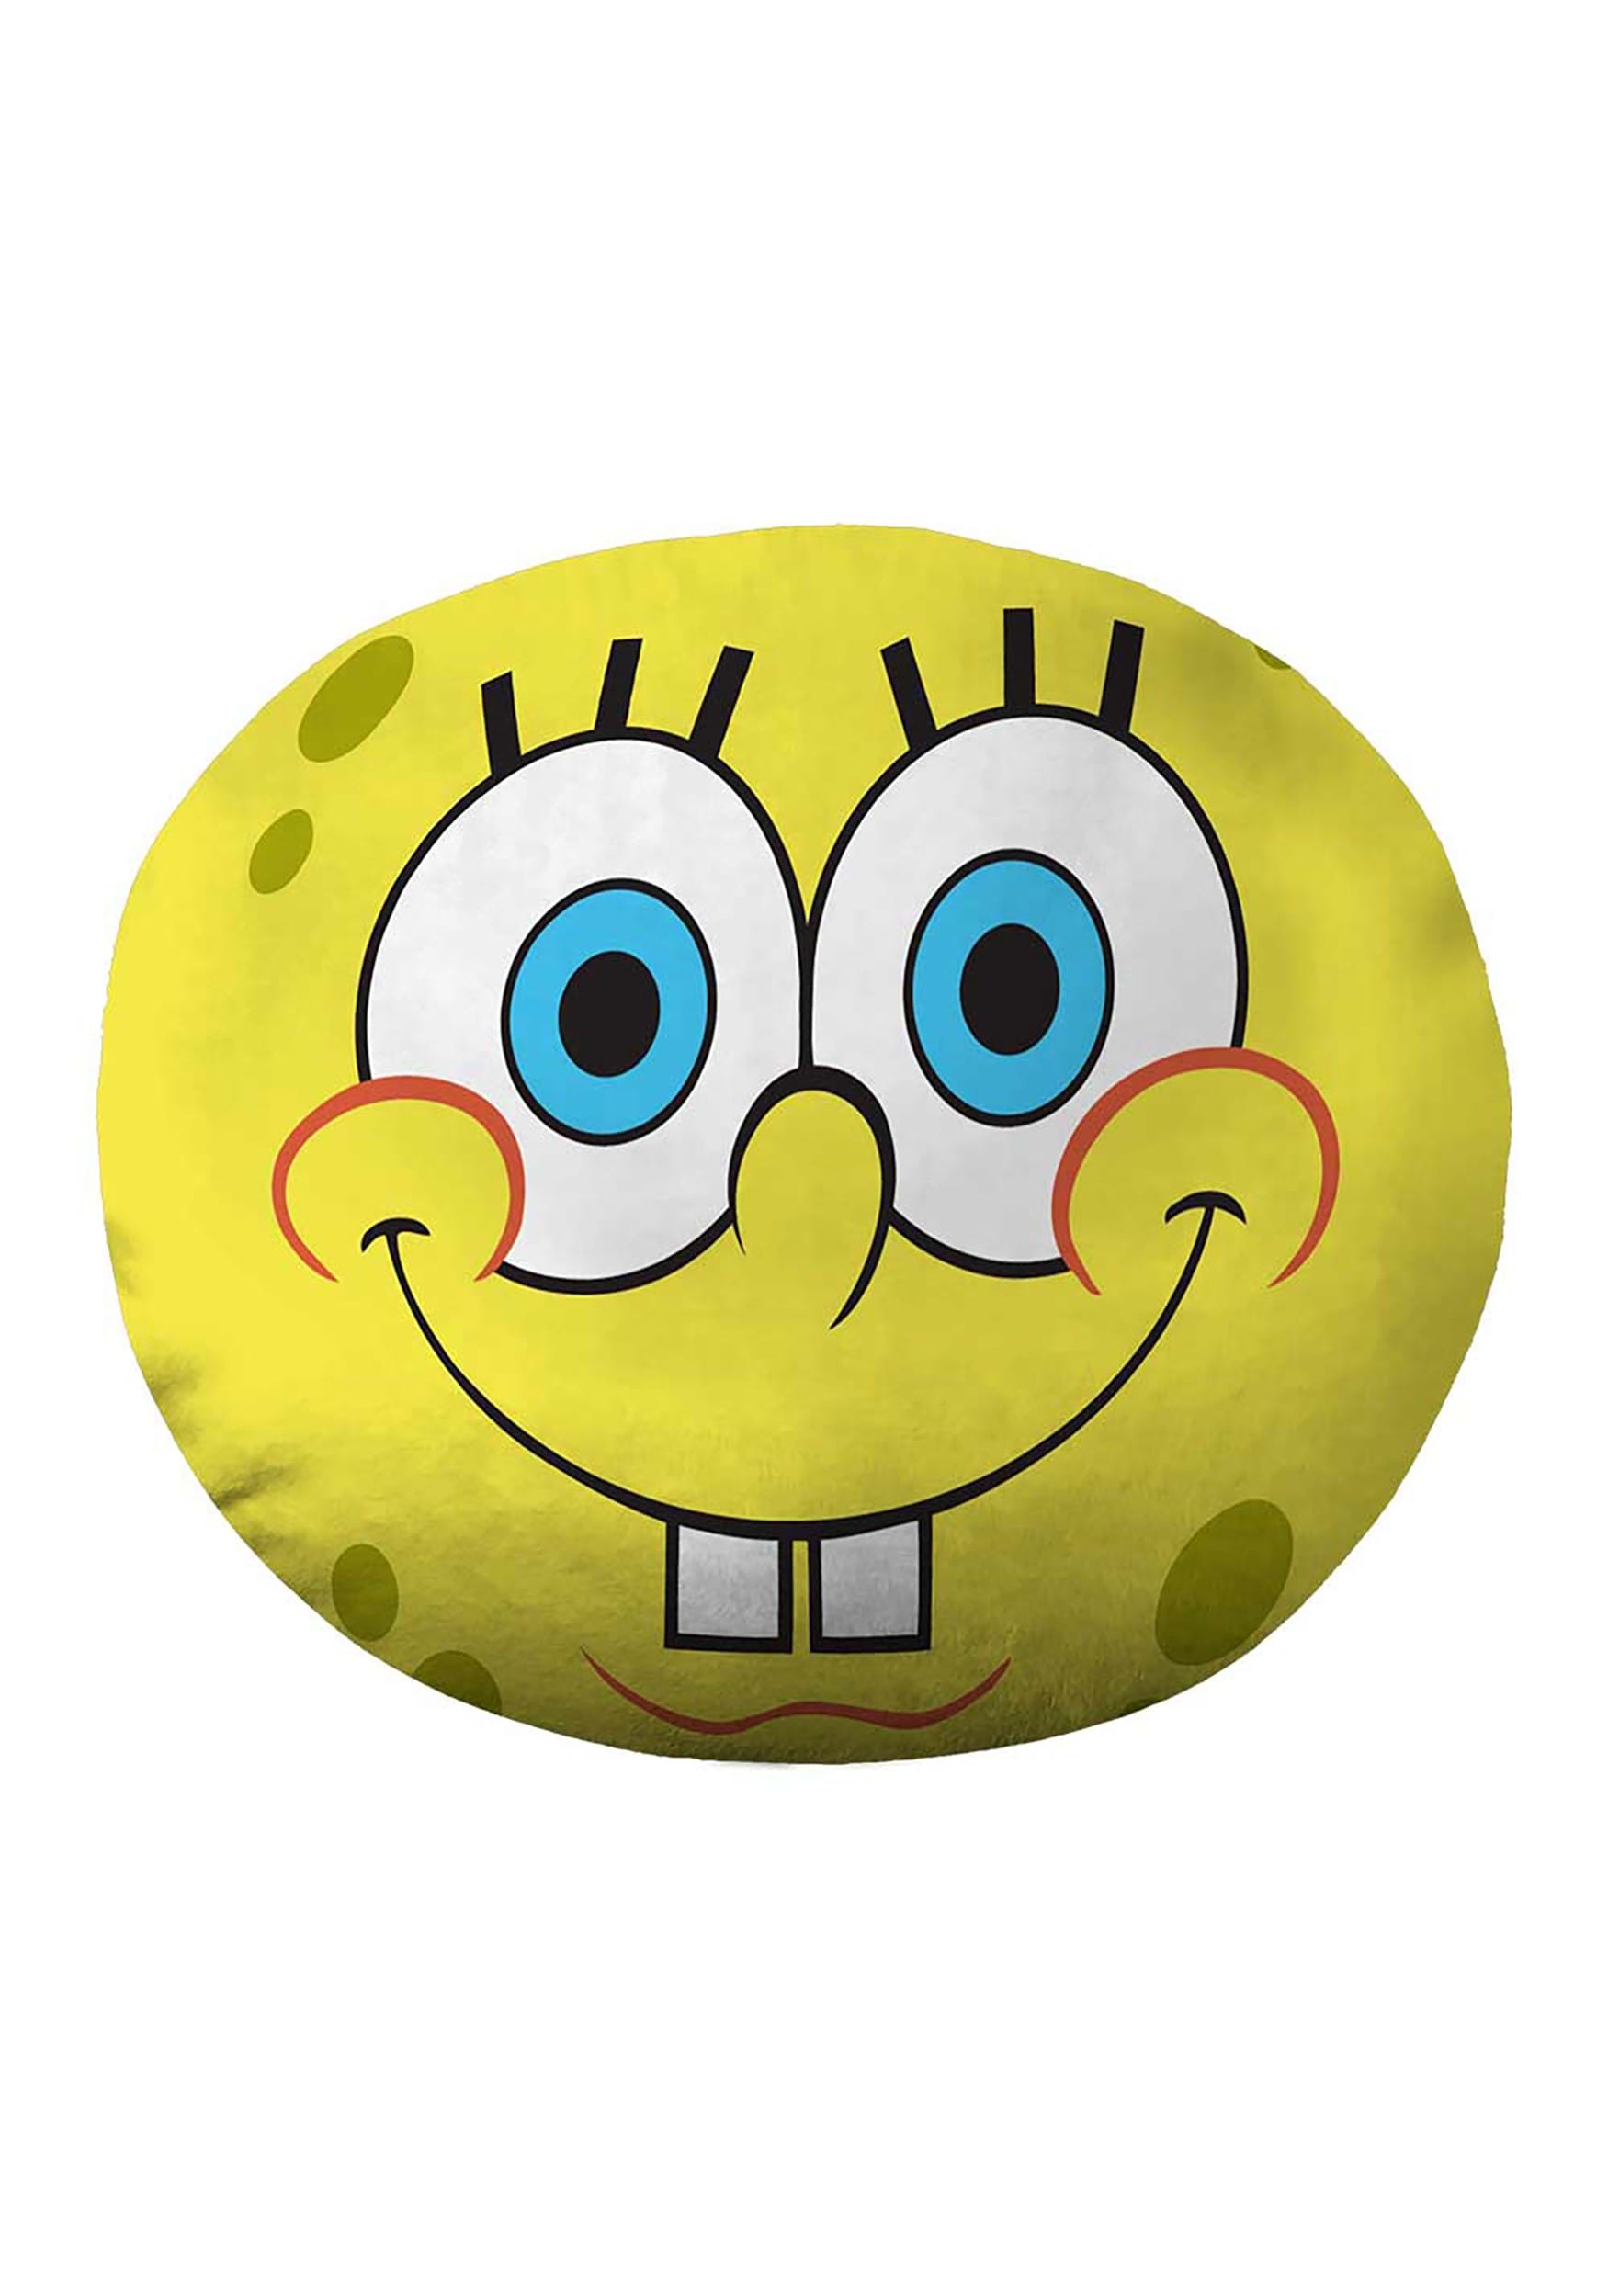 11 Inch Spongebob Travel Cloud Pillow | Television Bedding and Living